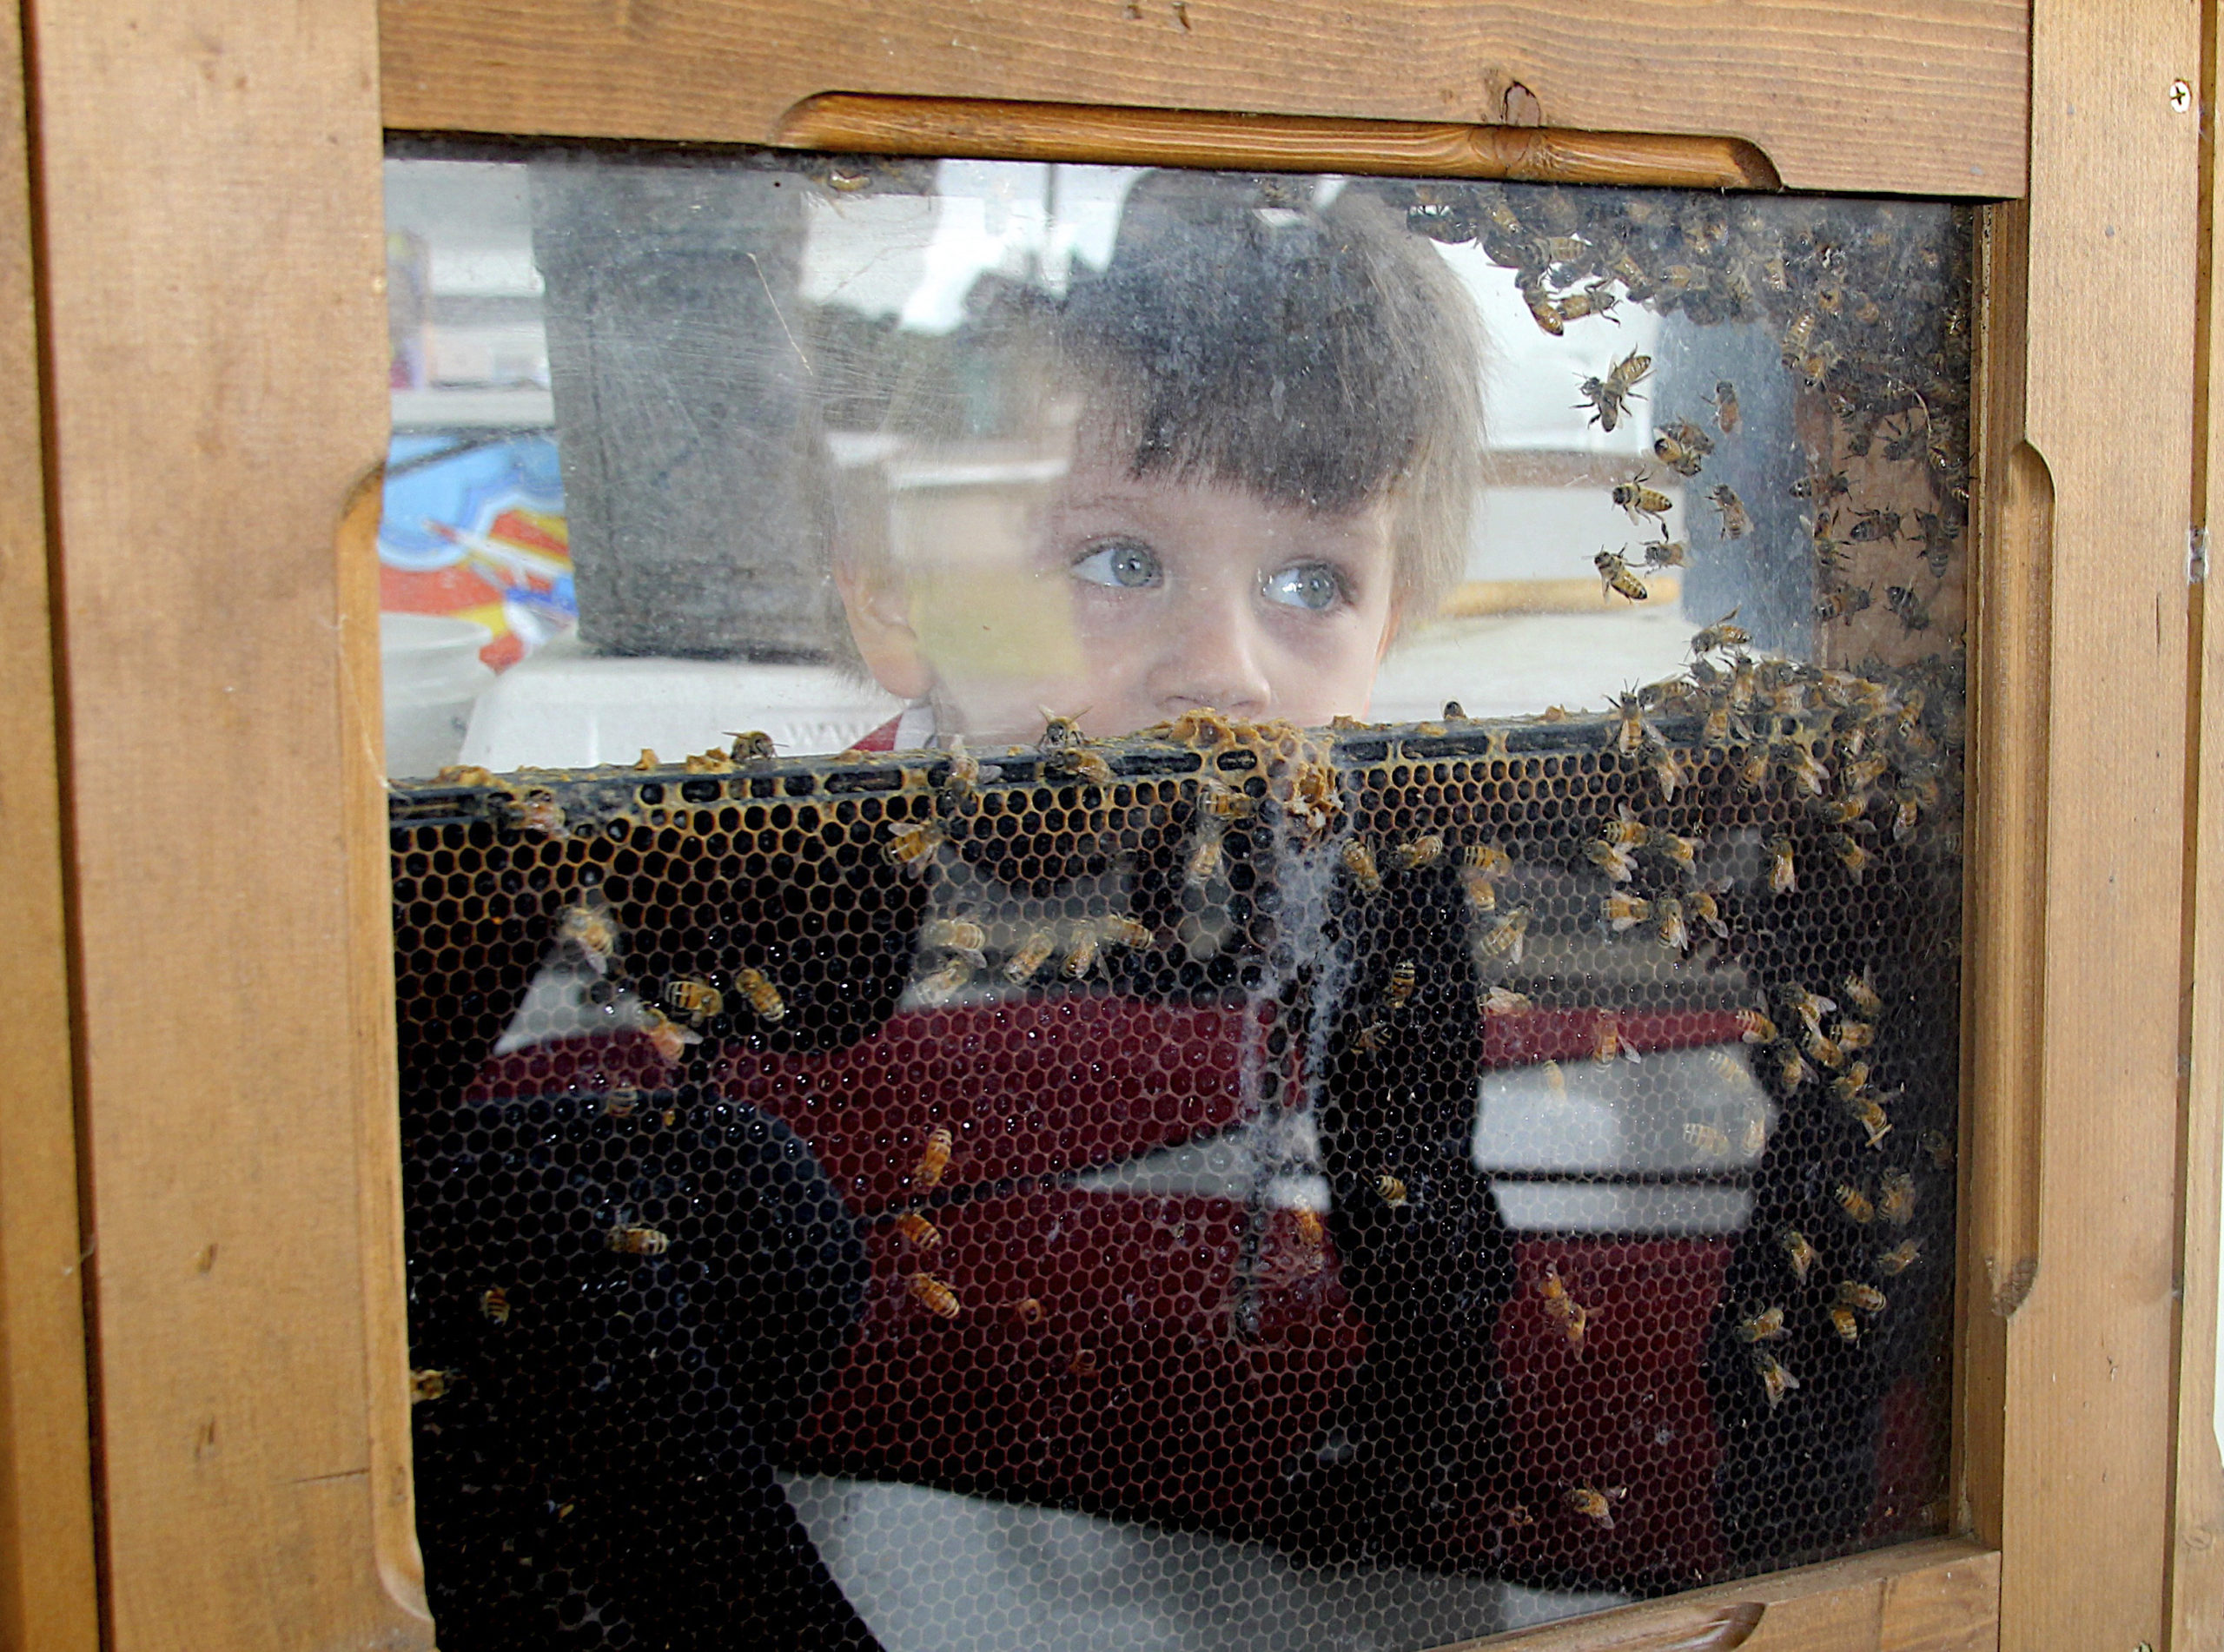 Camden Lipp watches honey bees in action at the Honey Harvest Fest hosted by Sound Aircraft Services at the East Hampton Airport.  KYRIL BROMLEY